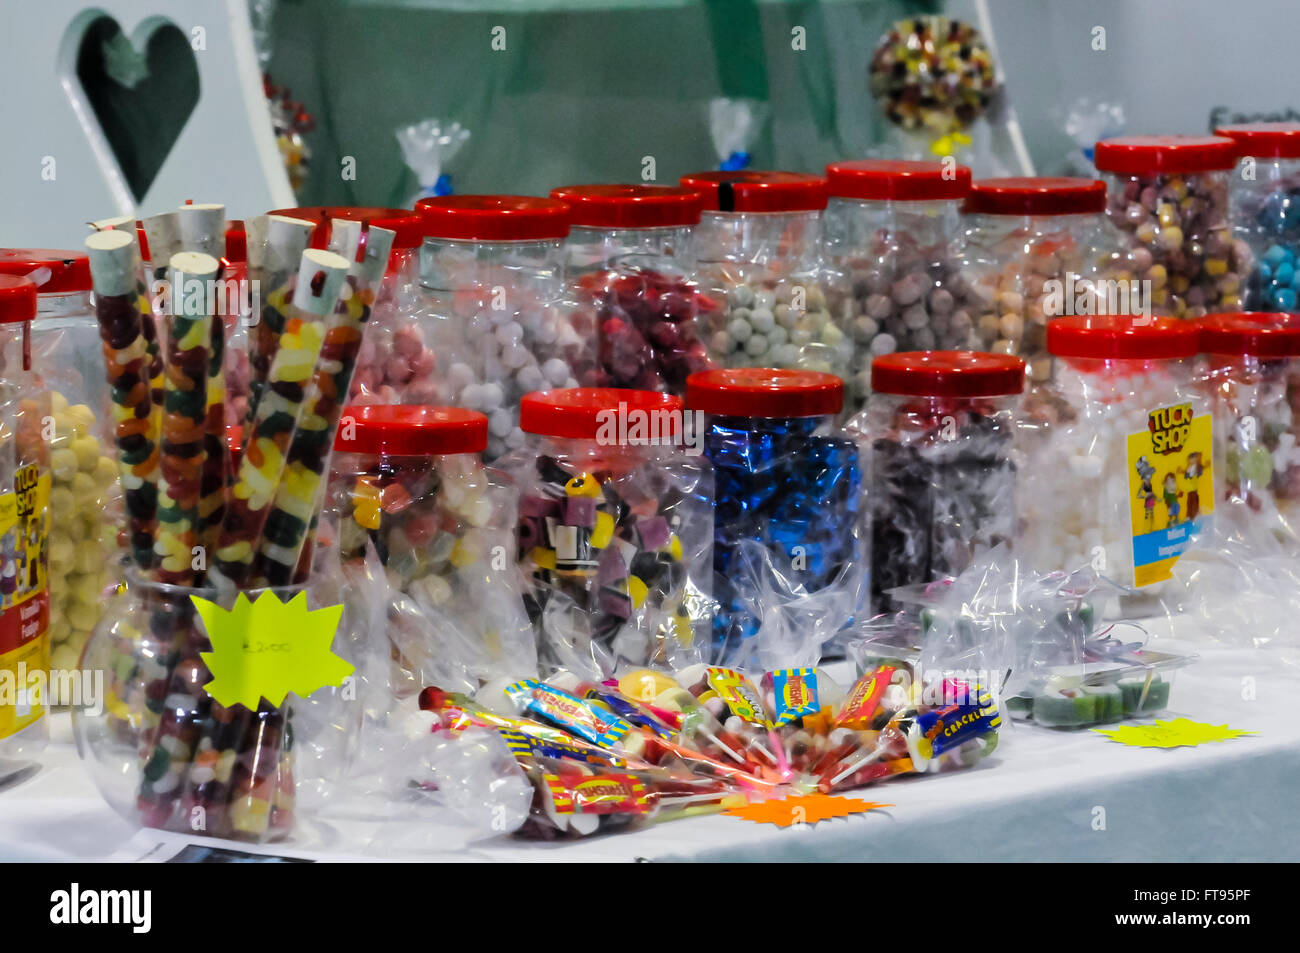 Large jars of sweets for sale at a market stall. Stock Photo